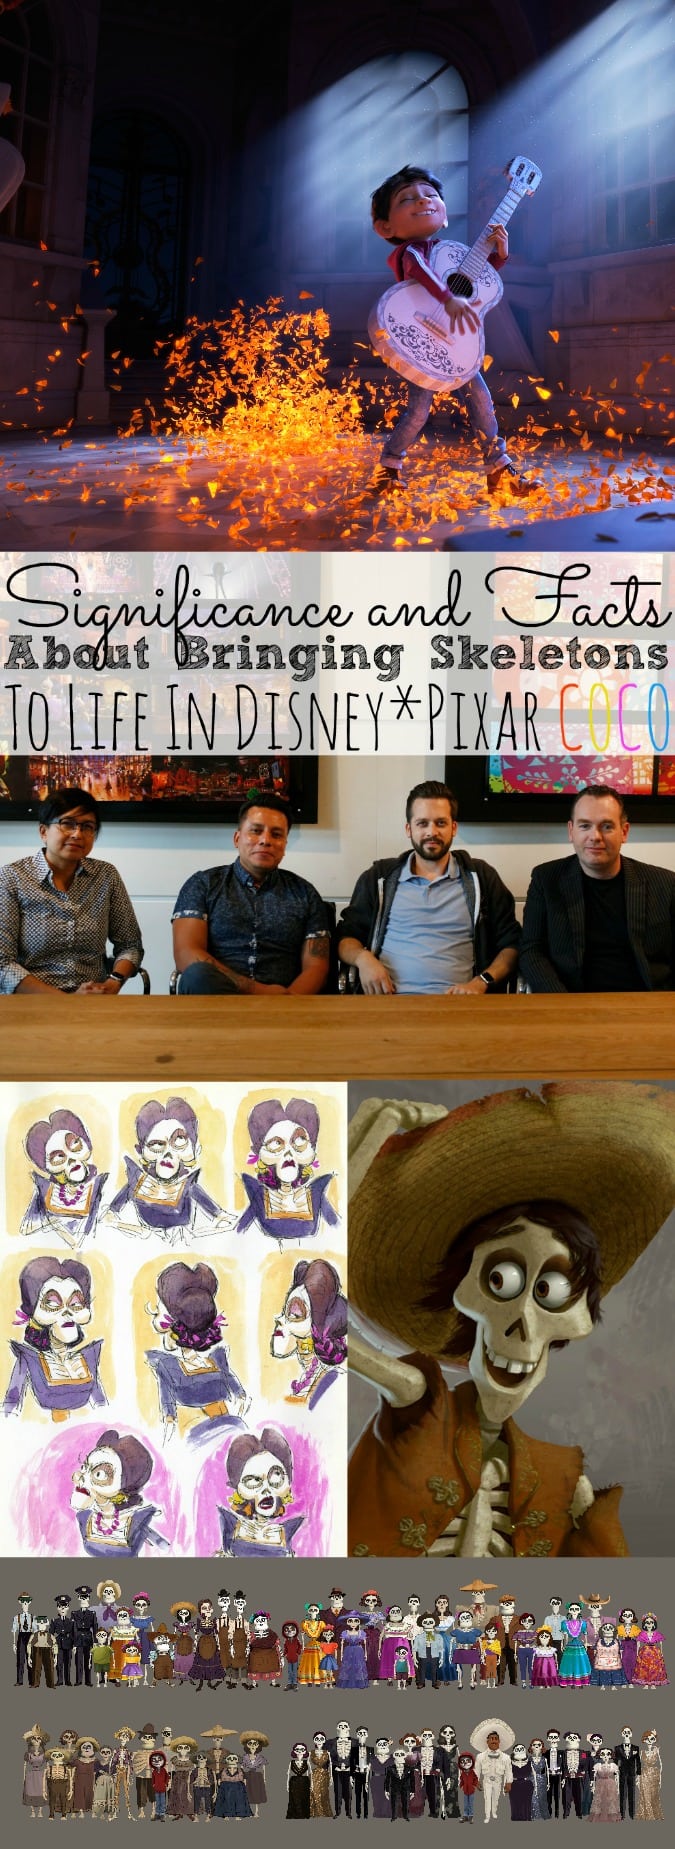 Significan and Facts About Bringing Skeletons to Life in Coco